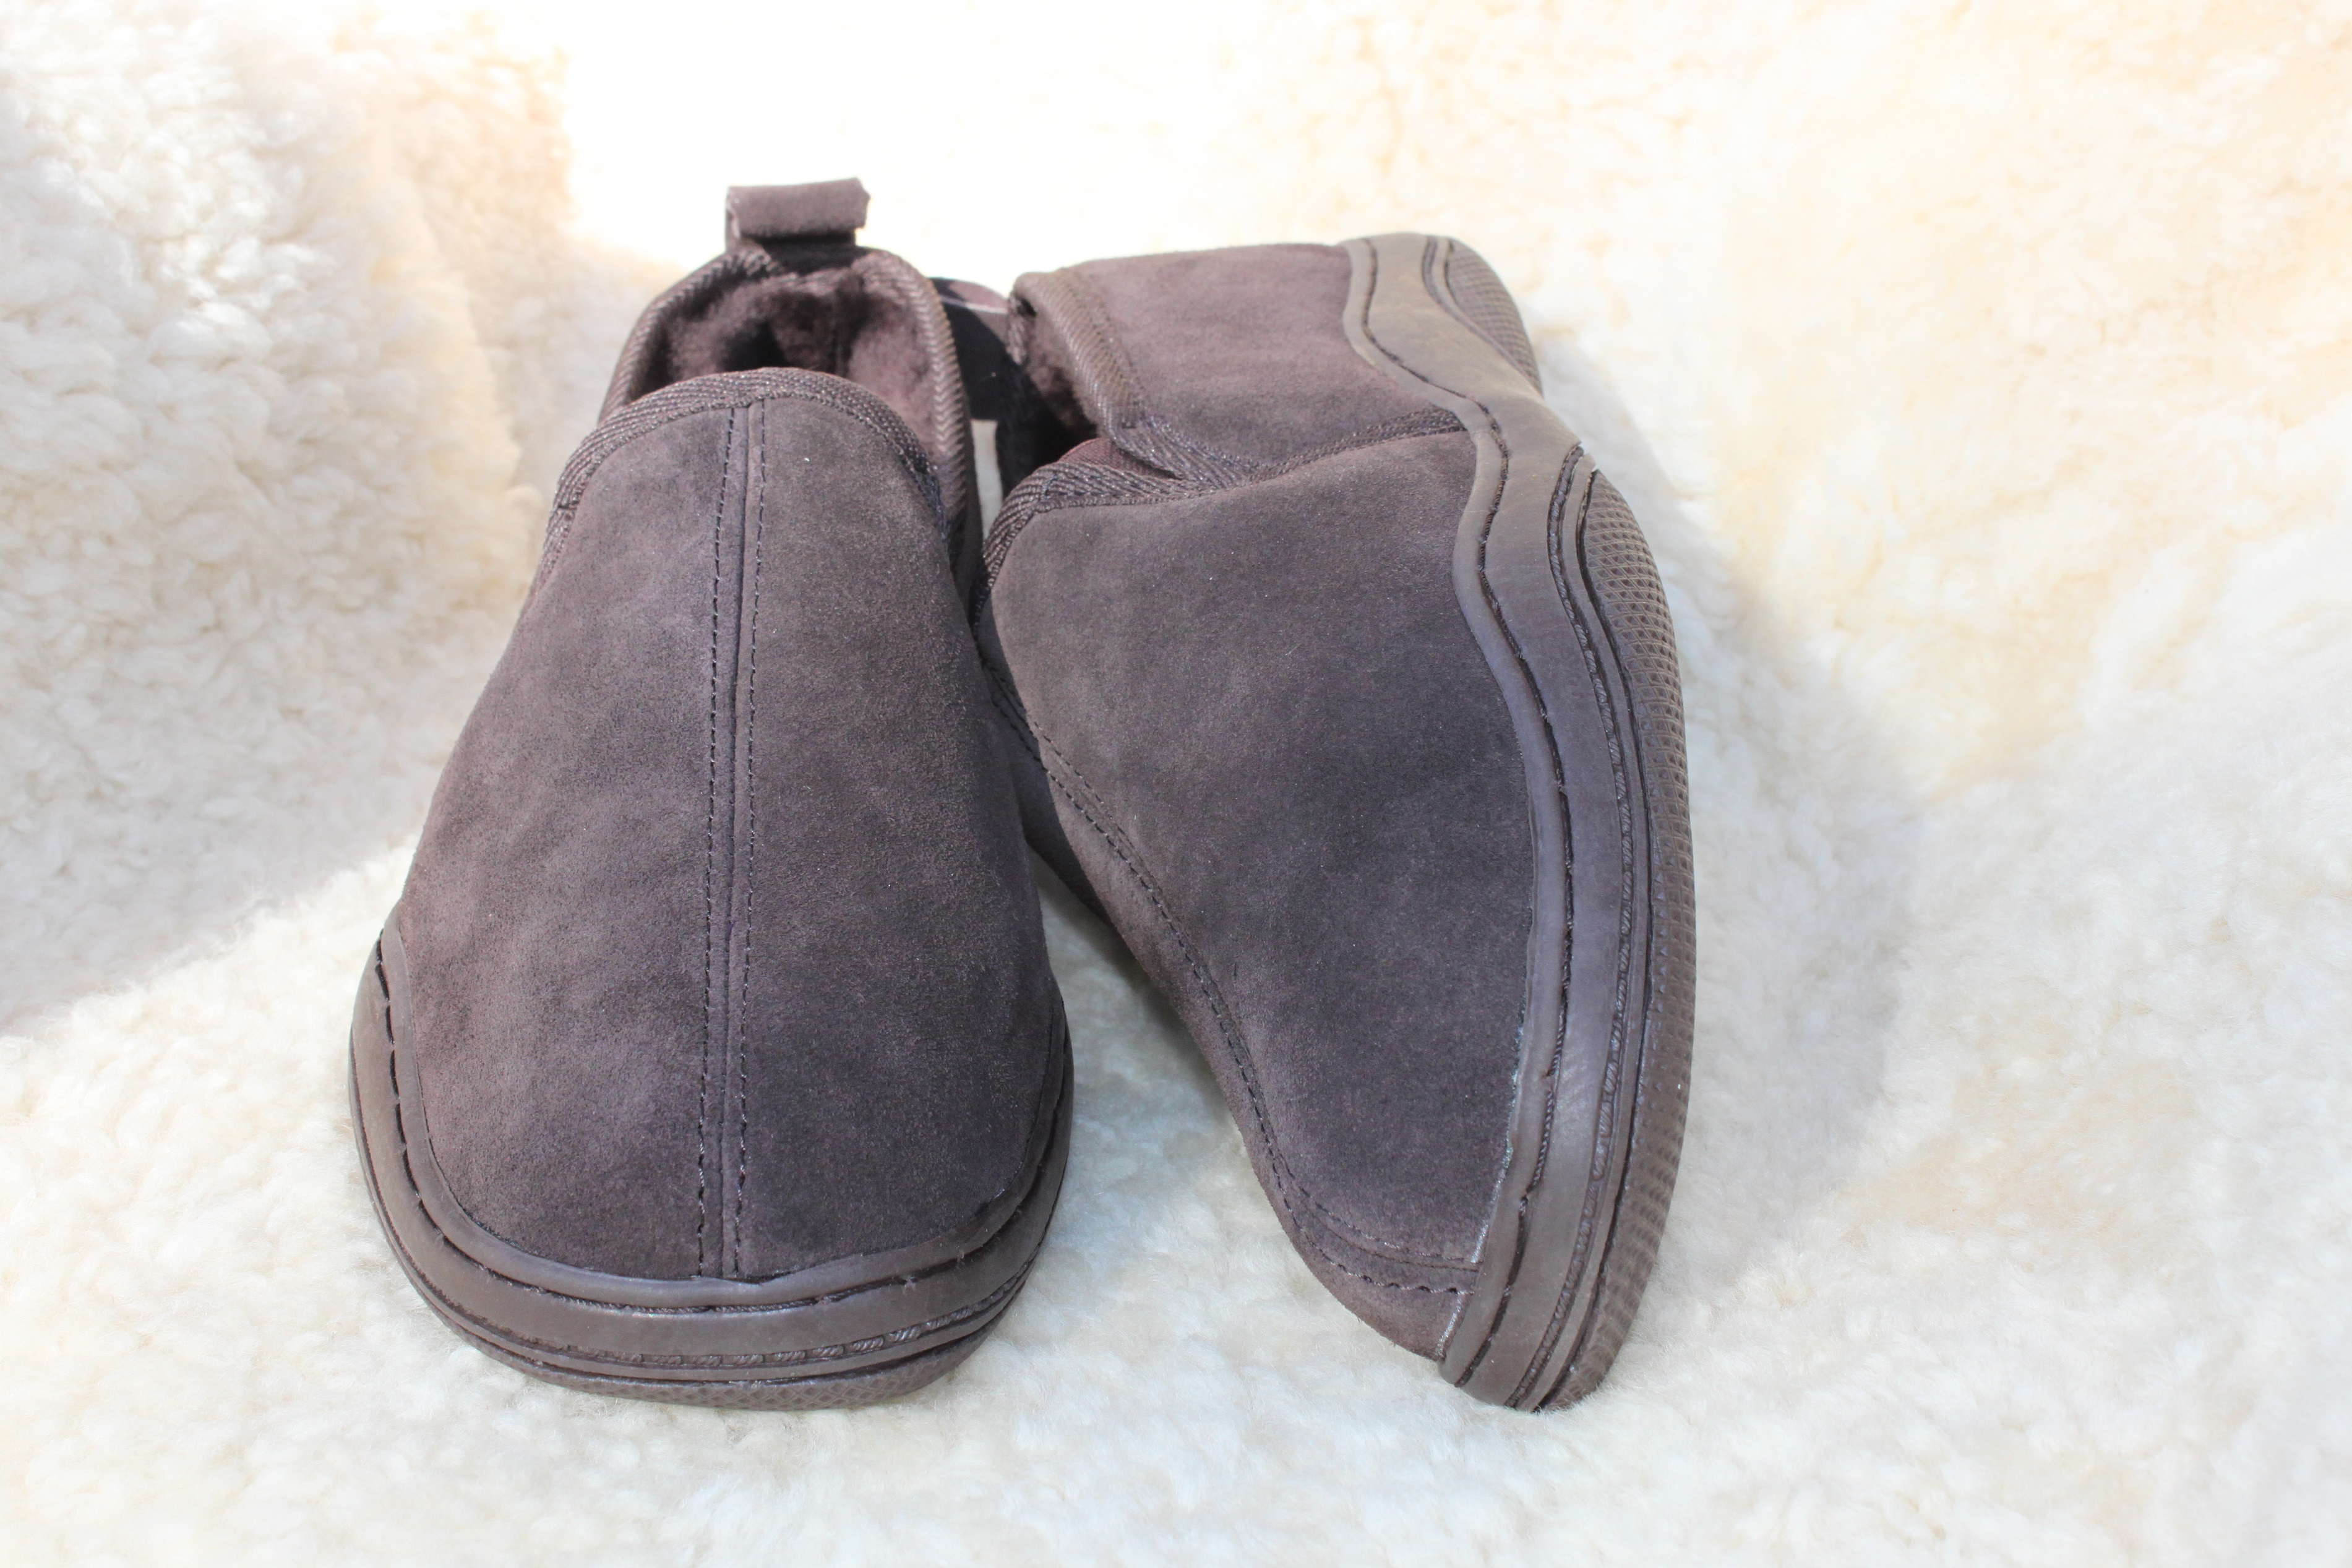 Men's Traditional Sheepskin Slipper with Gusset and Outdoor Sole